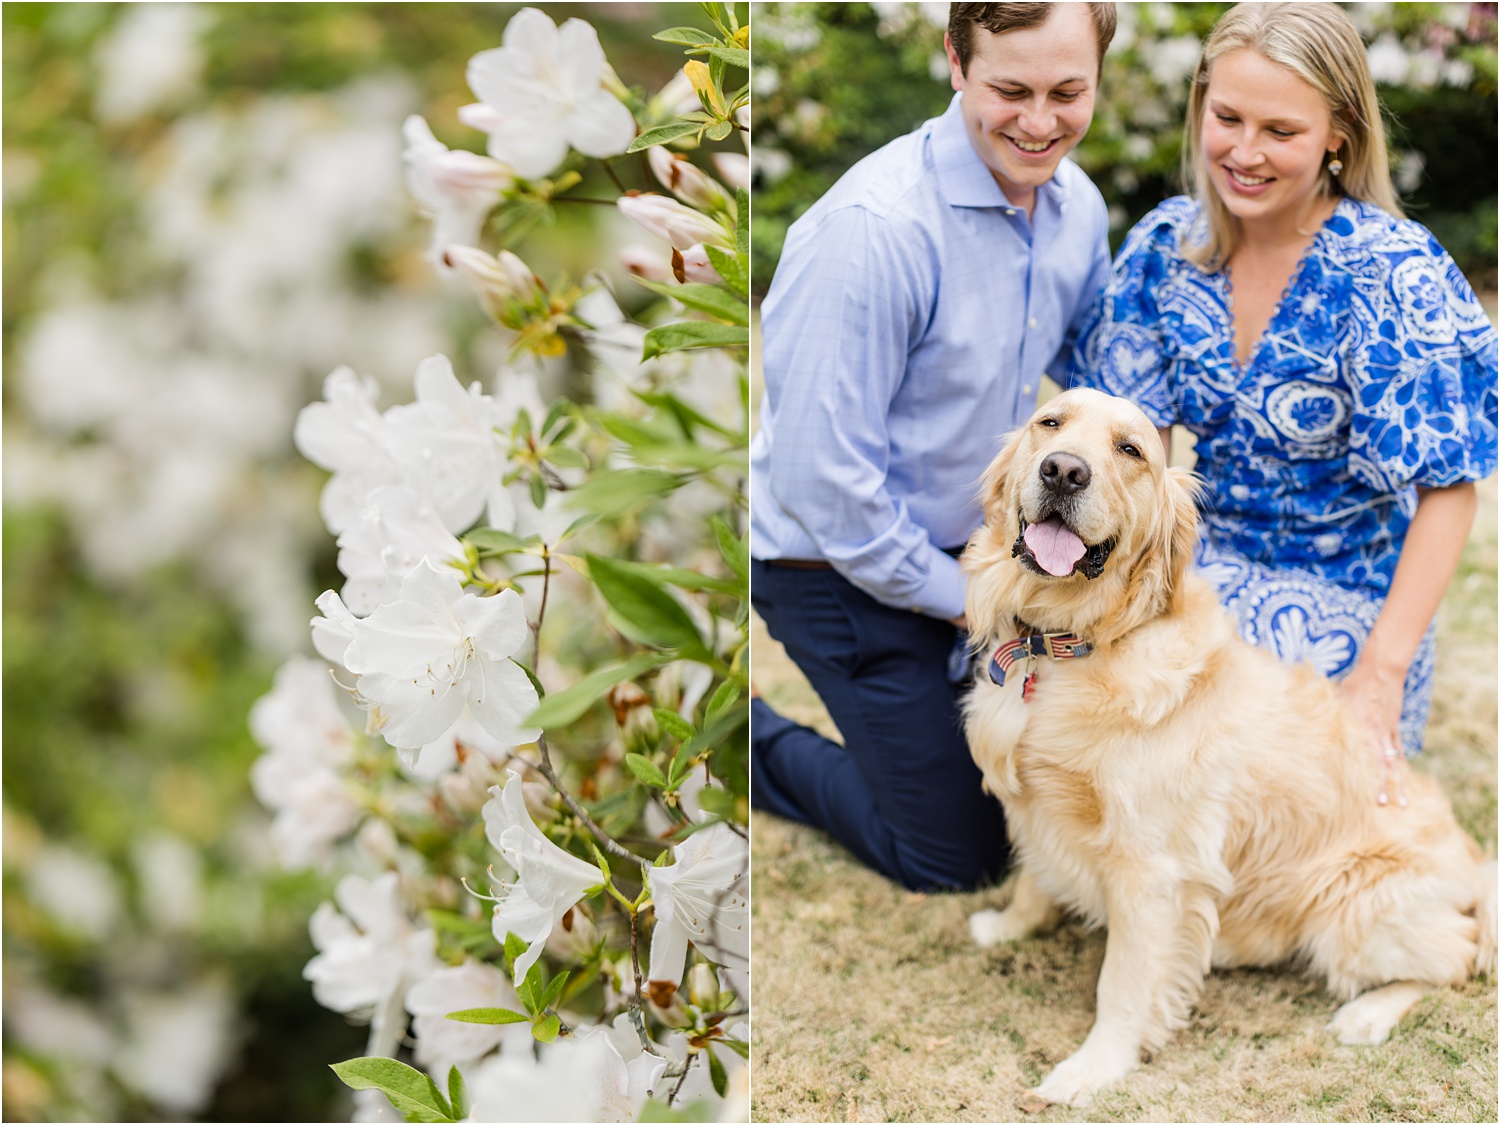 Private Garden Engagement Session